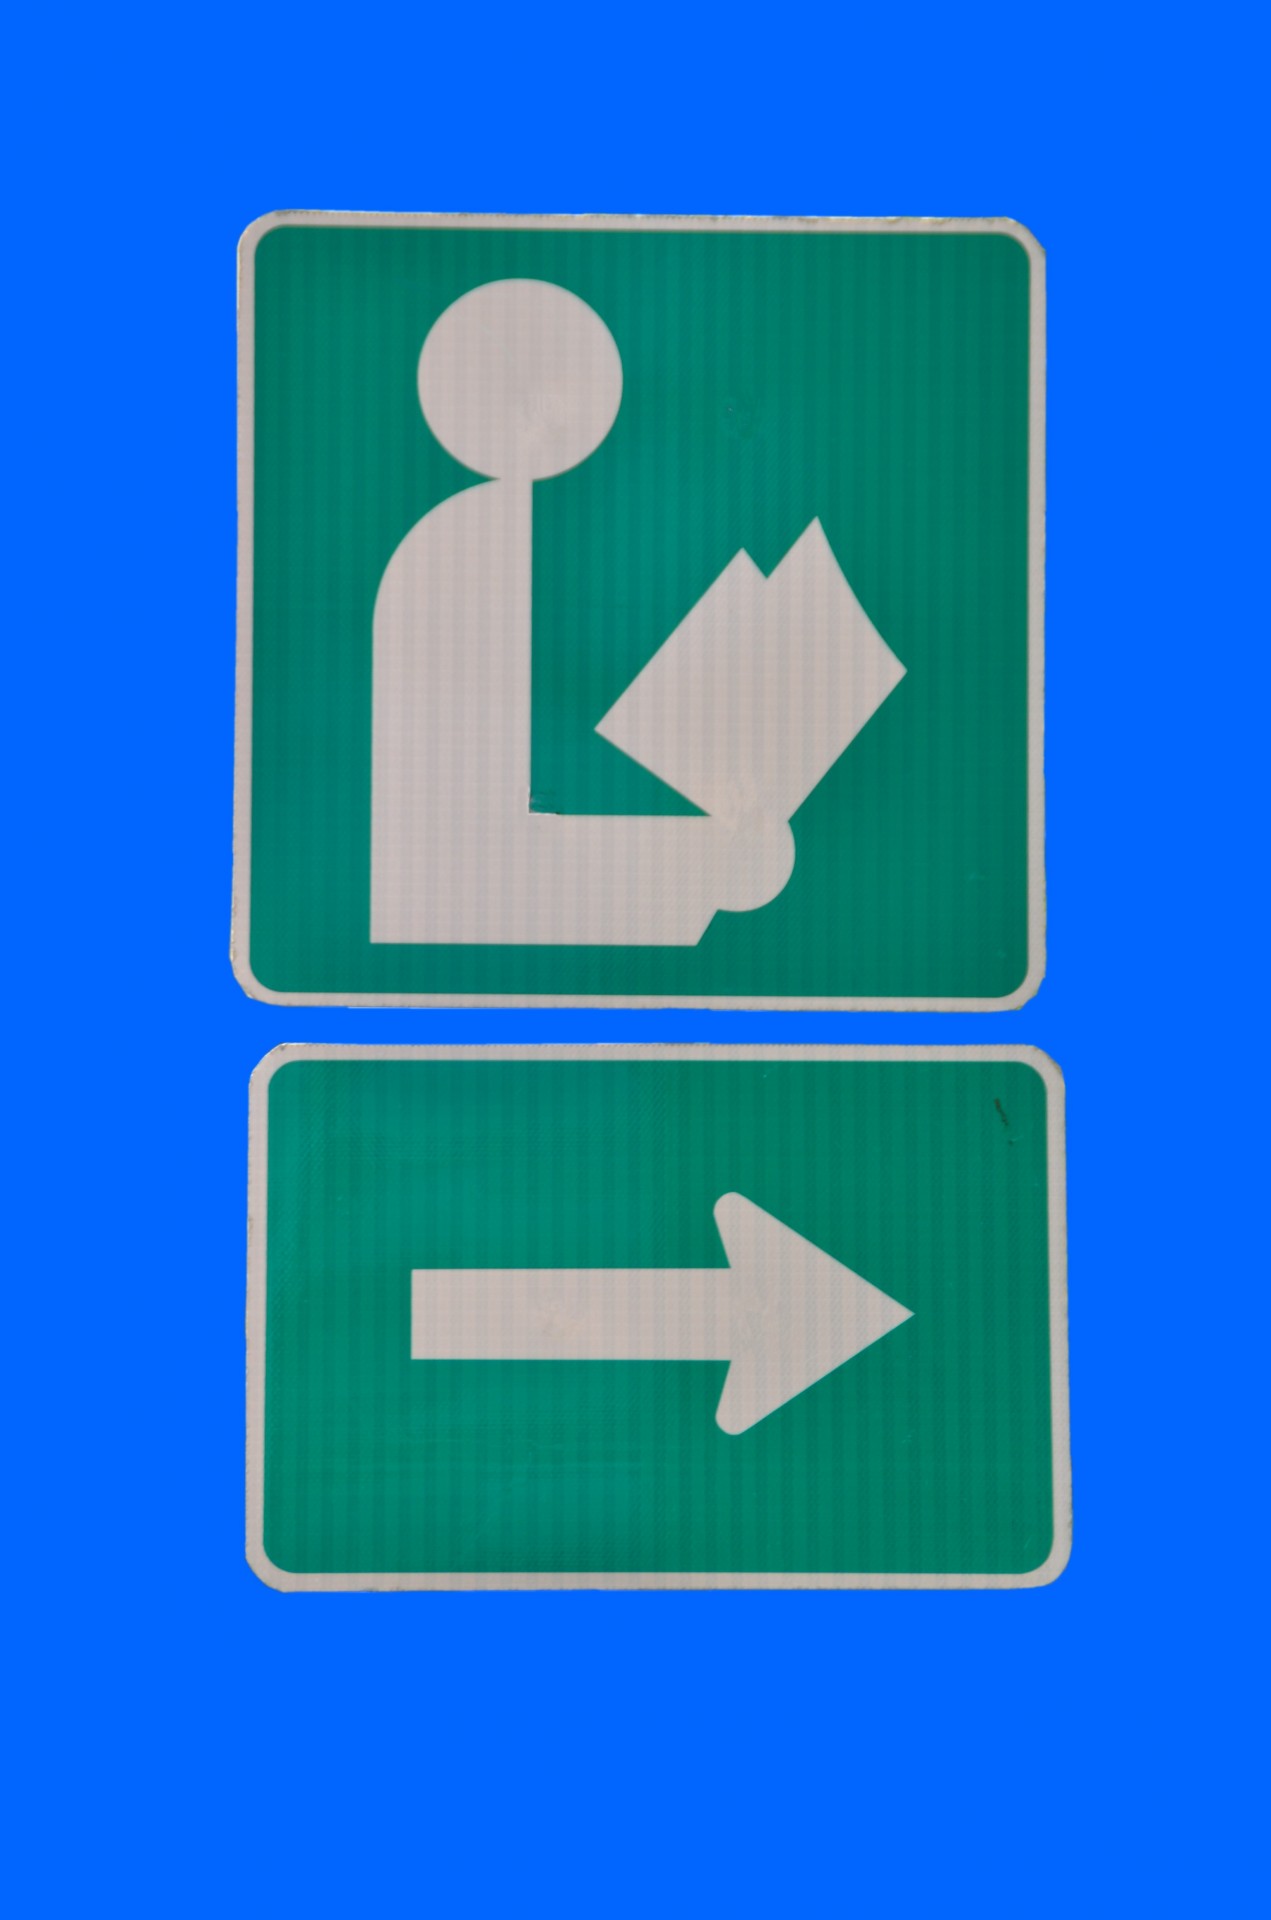 library-road-sign-free-stock-photo-public-domain-pictures